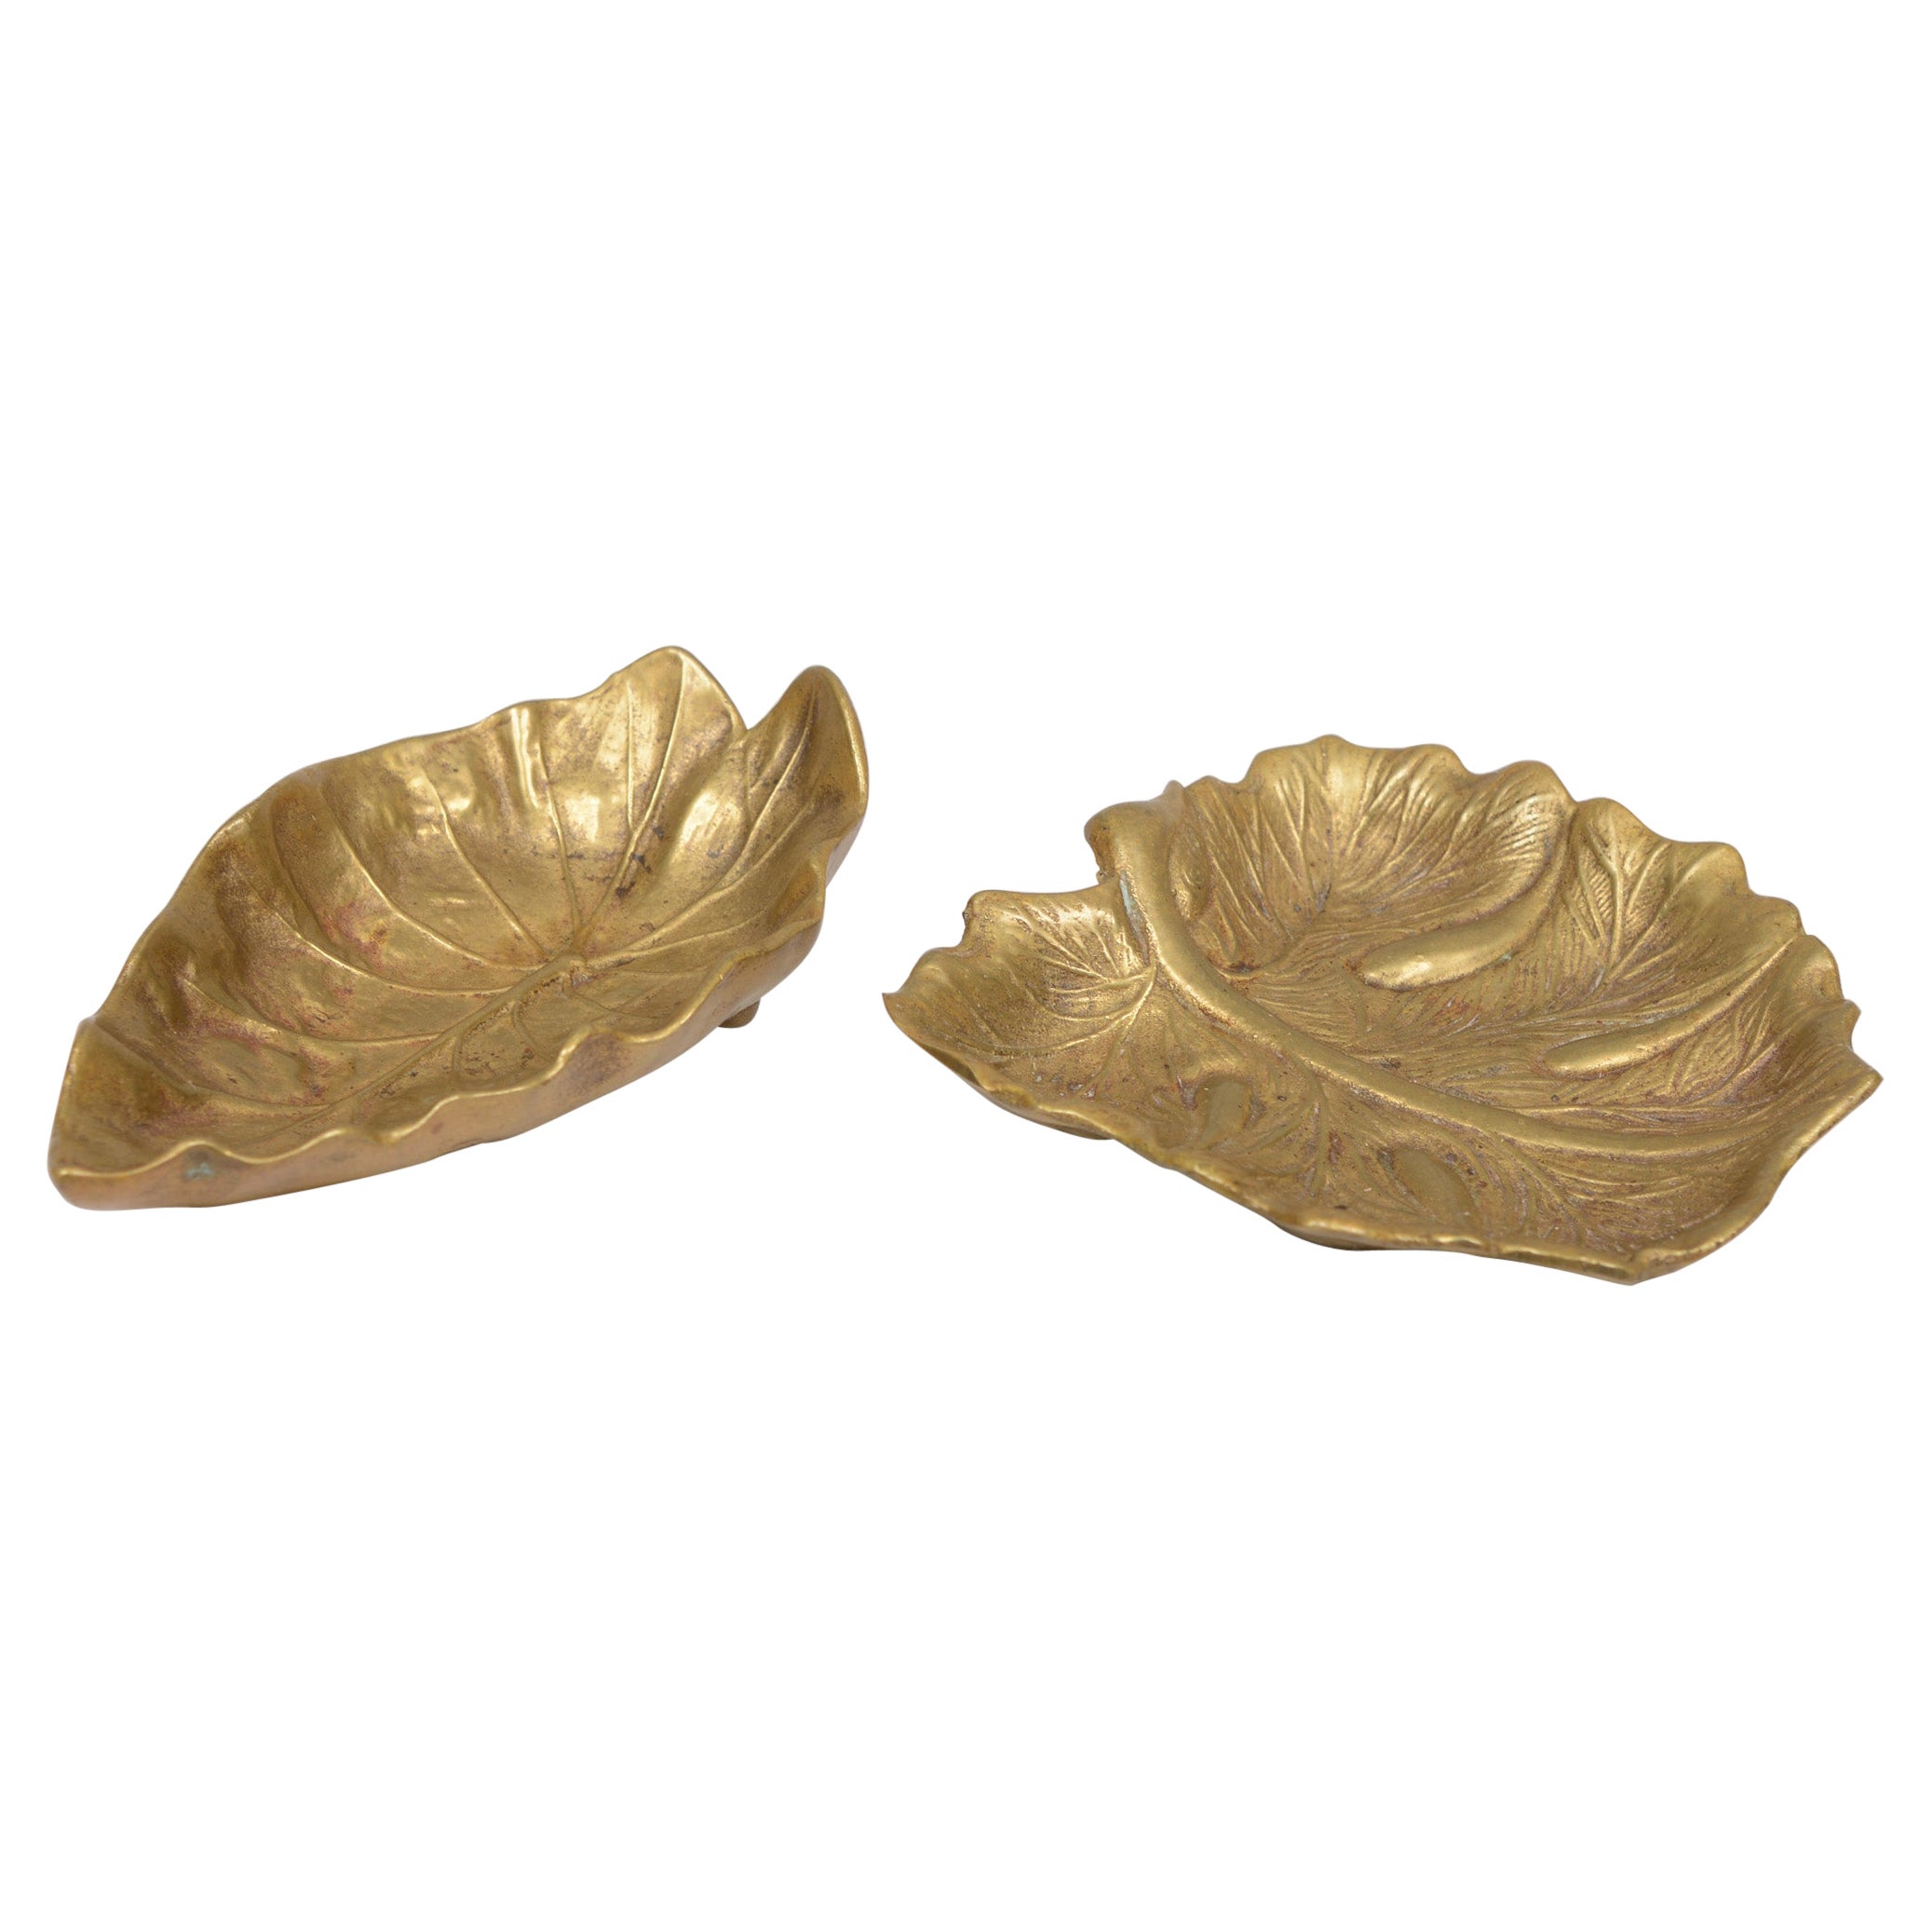 Virginia Metalcrafters Imperial Taro and Papaia Leaf Brass Trays